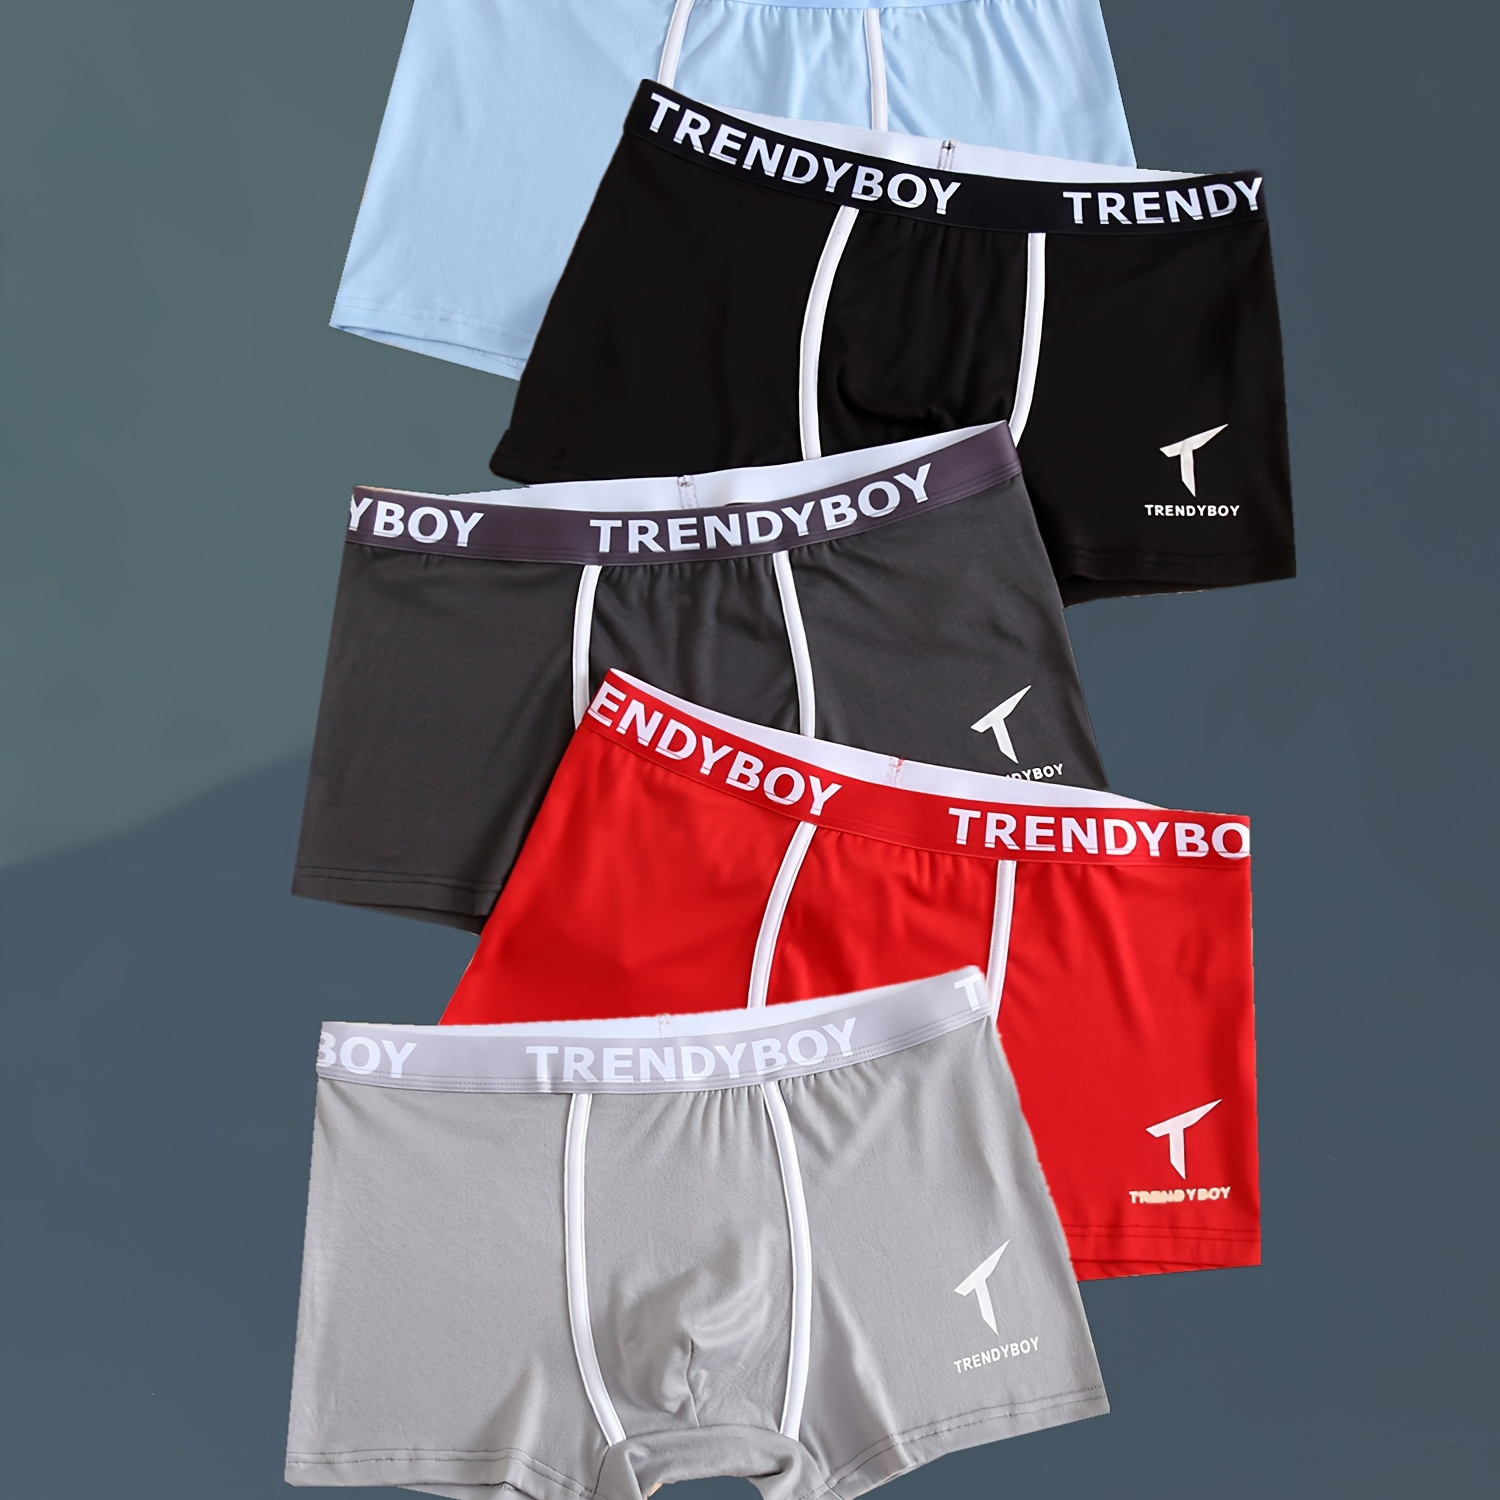 

5/4pcs Men's Fashion Breathable Soft Comfy Quick Drying Stretchy Boxer Briefs Shorts, Sports Trunks, Men's Underwear